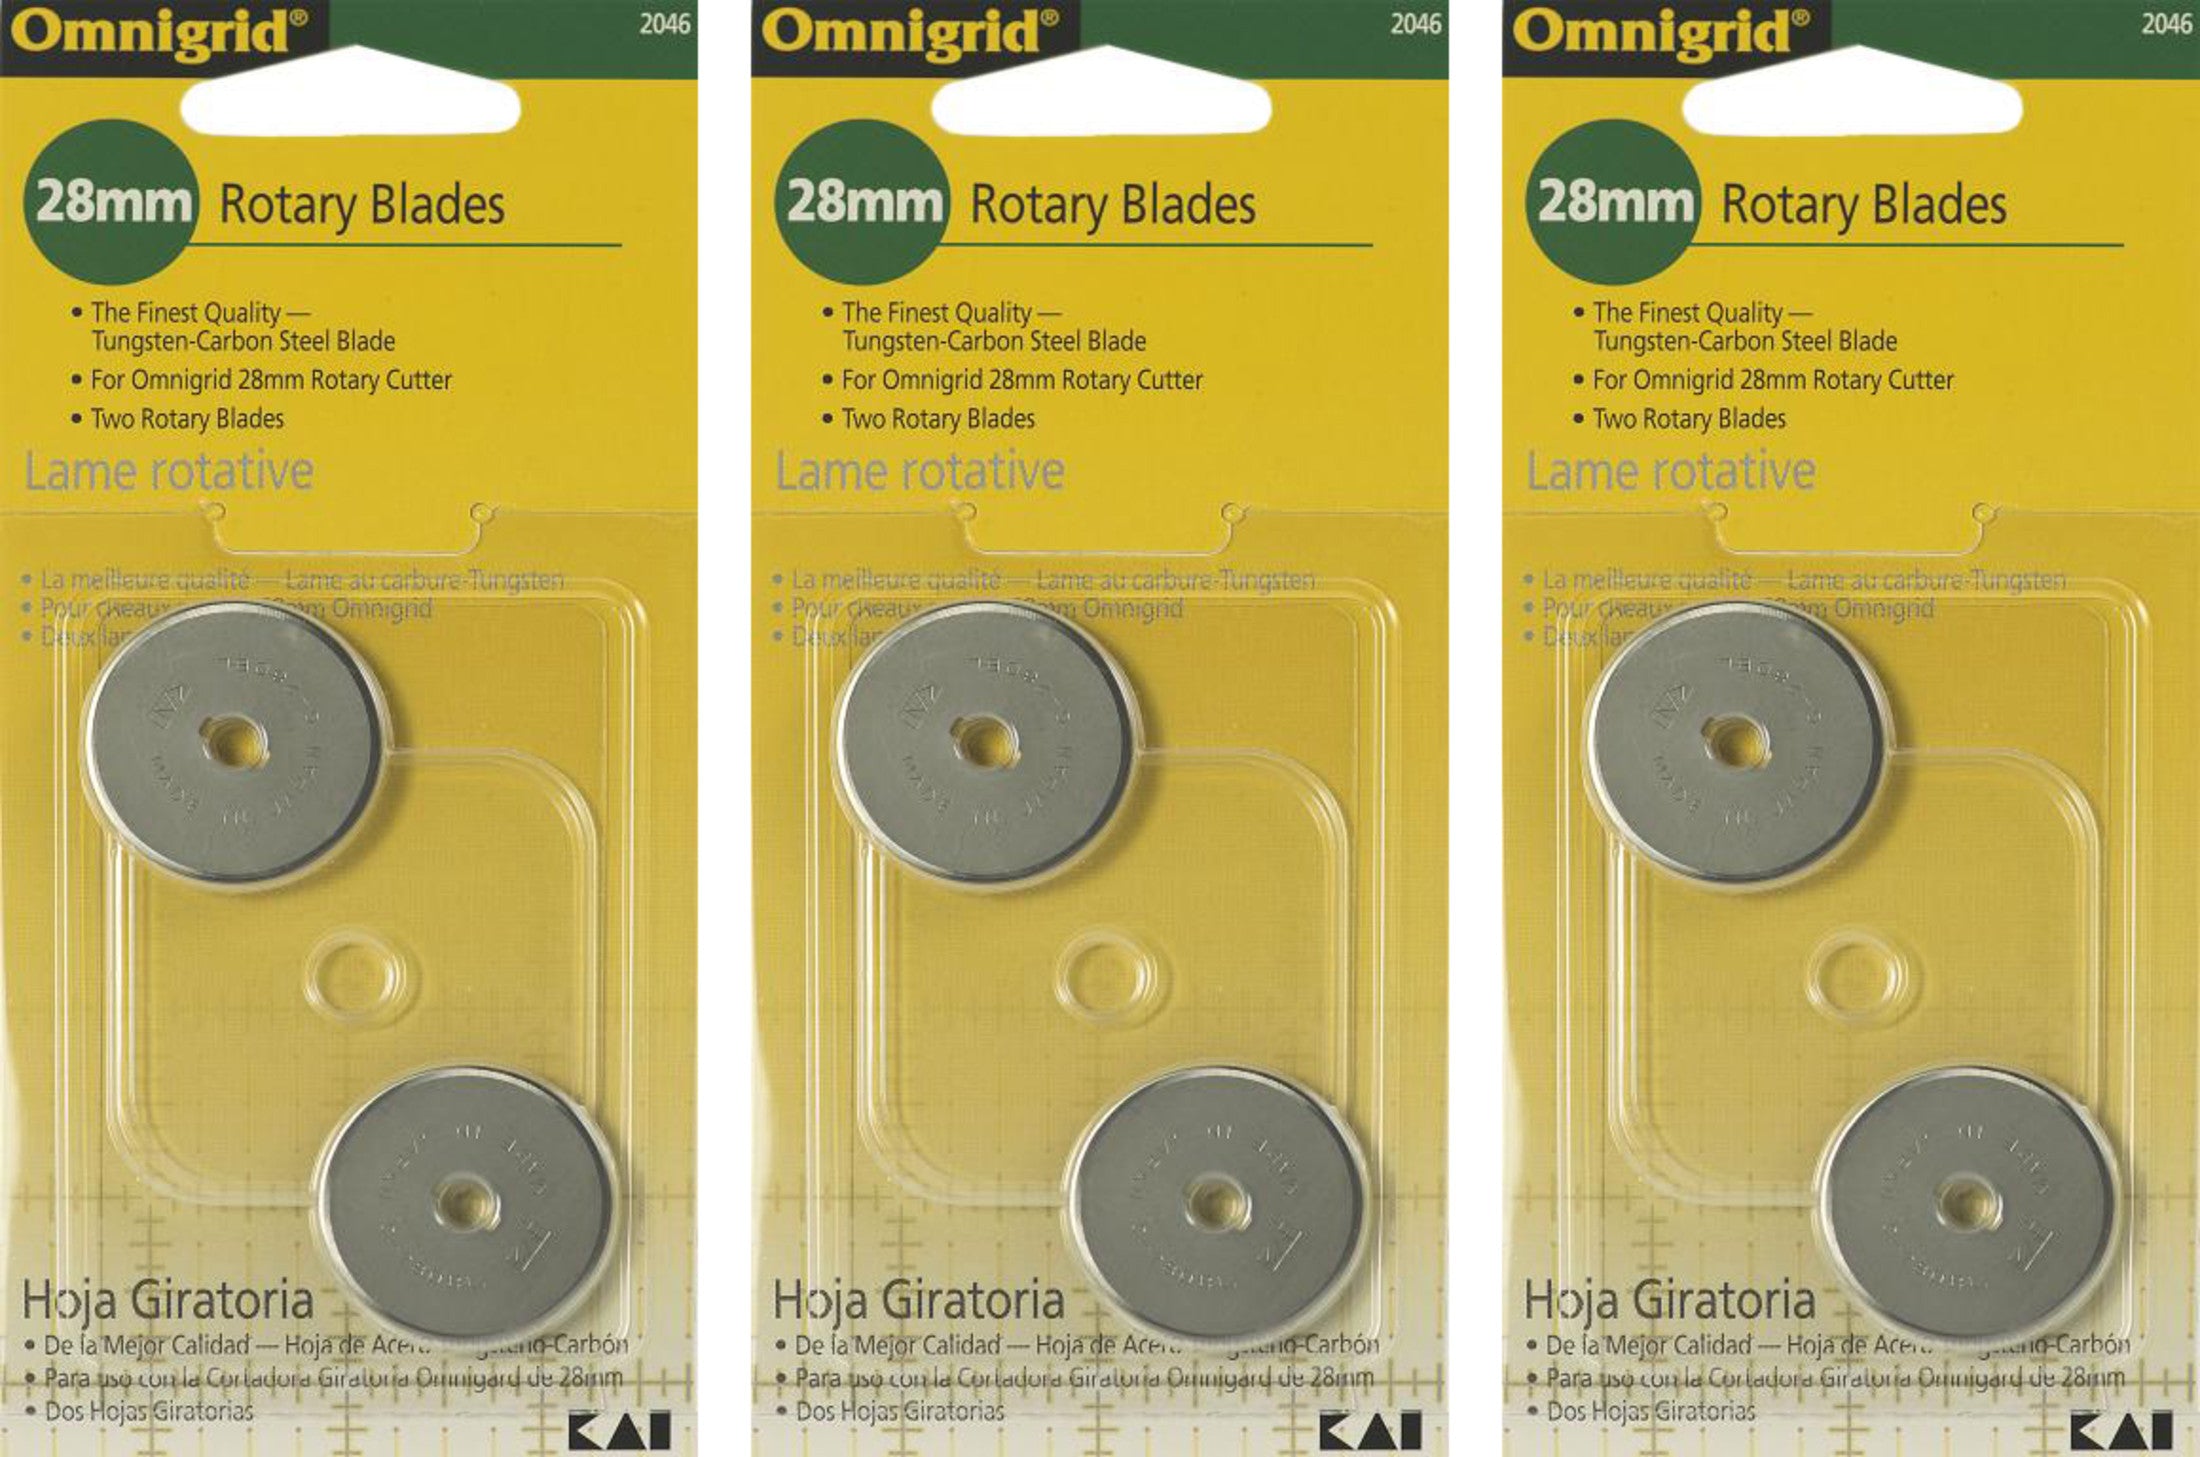 Omnigrid Rotary Replacement Blades